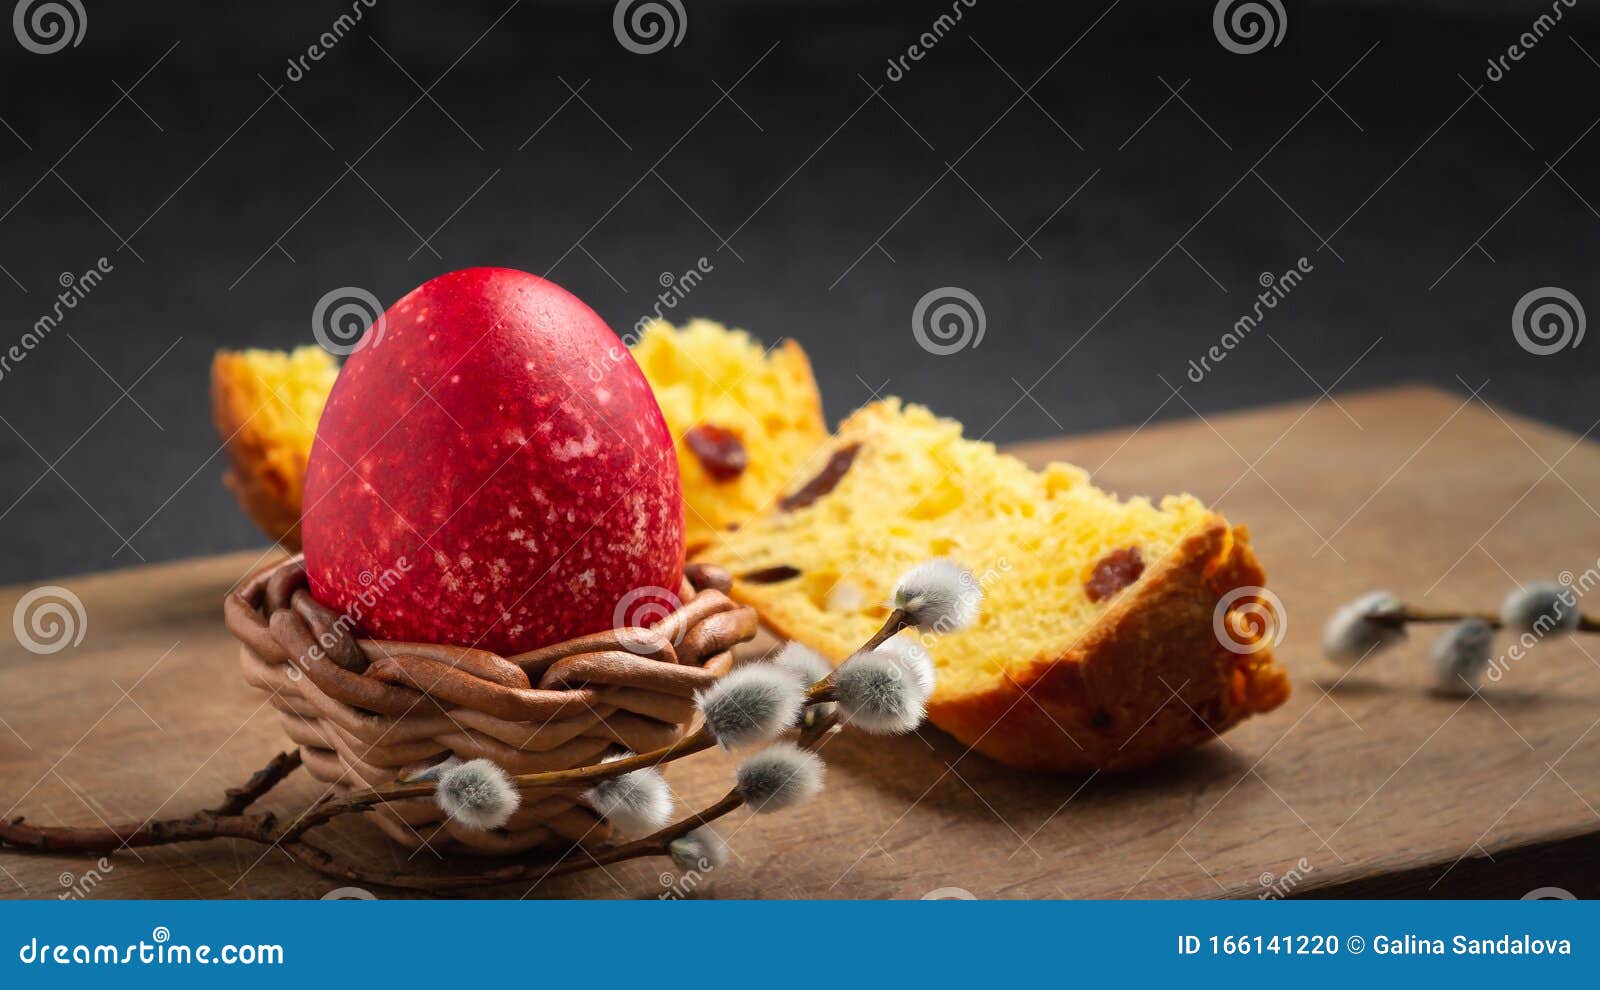 red easter egg in wisker stand and slice of easter cake on a cutting board on a dark table - traditional easter